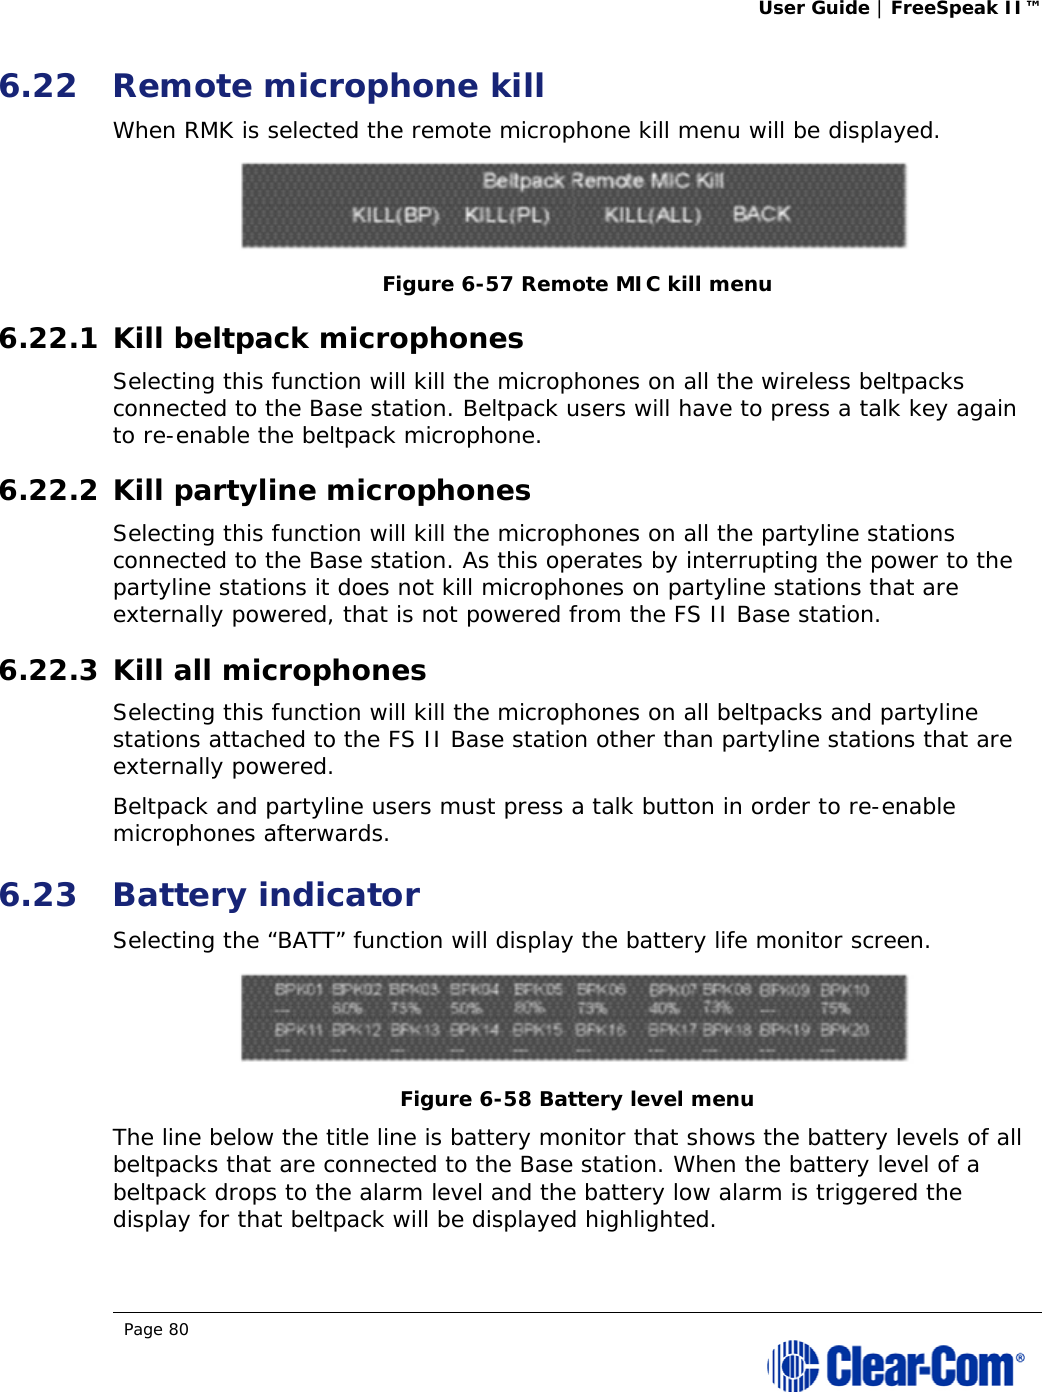 User Guide | FreeSpeak II™  Page 80  6.22 Remote microphone kill When RMK is selected the remote microphone kill menu will be displayed.  Figure 6-57 Remote MIC kill menu 6.22.1 Kill beltpack microphones Selecting this function will kill the microphones on all the wireless beltpacks connected to the Base station. Beltpack users will have to press a talk key again to re-enable the beltpack microphone. 6.22.2 Kill partyline microphones Selecting this function will kill the microphones on all the partyline stations connected to the Base station. As this operates by interrupting the power to the partyline stations it does not kill microphones on partyline stations that are externally powered, that is not powered from the FS II Base station. 6.22.3 Kill all microphones Selecting this function will kill the microphones on all beltpacks and partyline stations attached to the FS II Base station other than partyline stations that are externally powered. Beltpack and partyline users must press a talk button in order to re-enable microphones afterwards. 6.23 Battery indicator Selecting the “BATT” function will display the battery life monitor screen.  Figure 6-58 Battery level menu The line below the title line is battery monitor that shows the battery levels of all beltpacks that are connected to the Base station. When the battery level of a beltpack drops to the alarm level and the battery low alarm is triggered the display for that beltpack will be displayed highlighted.  